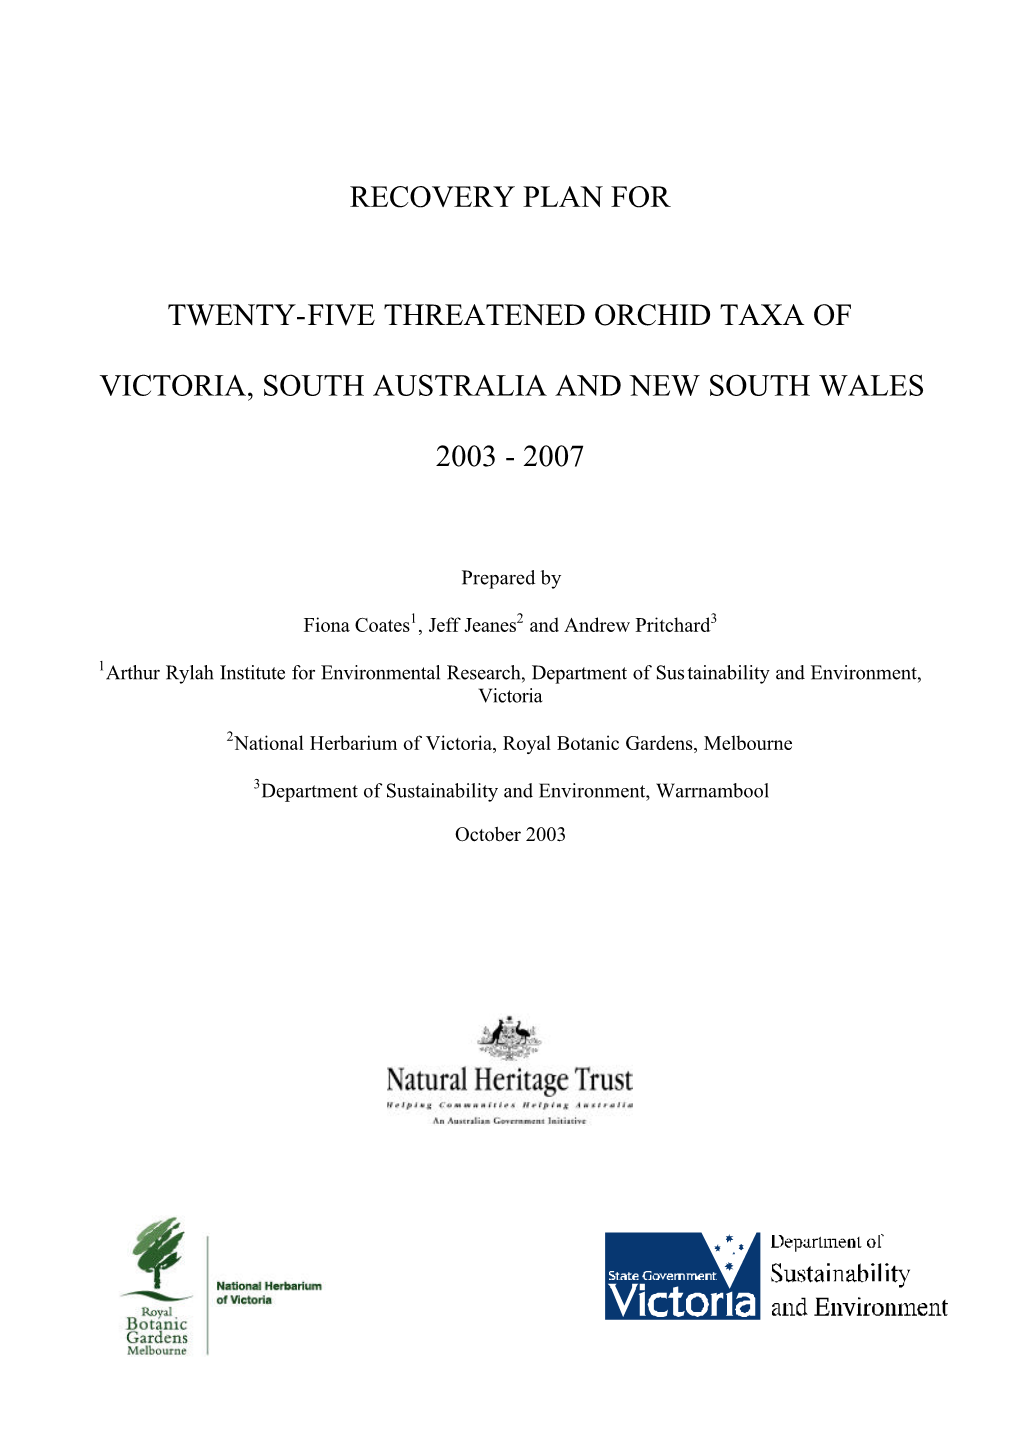 Recovery Plan for Twenty-Five Threatened Orchid Taxa of Victoria